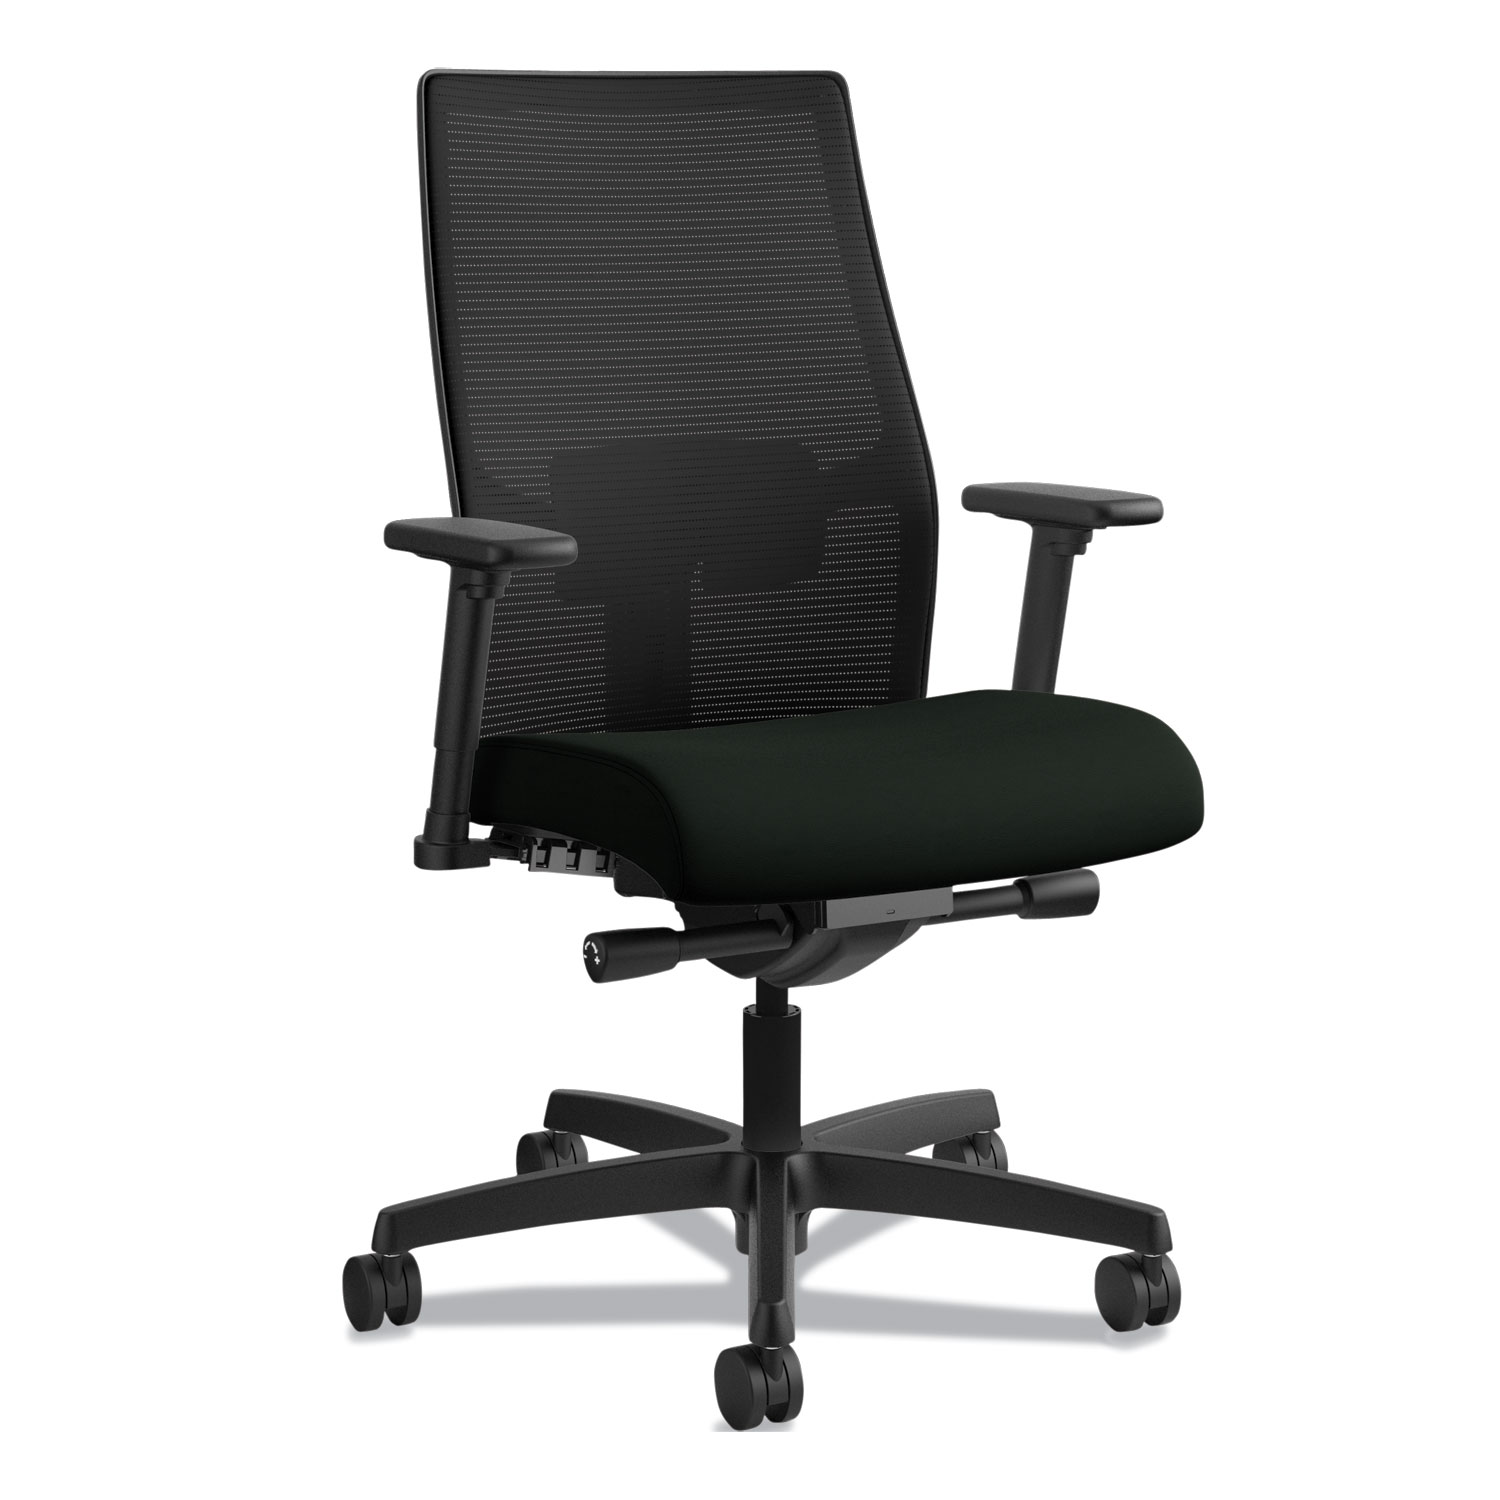  HON HONI2M2AMLU10TK Ignition 2.0 4-Way Stretch Mid-Back Mesh Task Chair, Supports up to 300 lbs, Black Seat/Back, Black Base (HONI2M2AMLU10TK) 